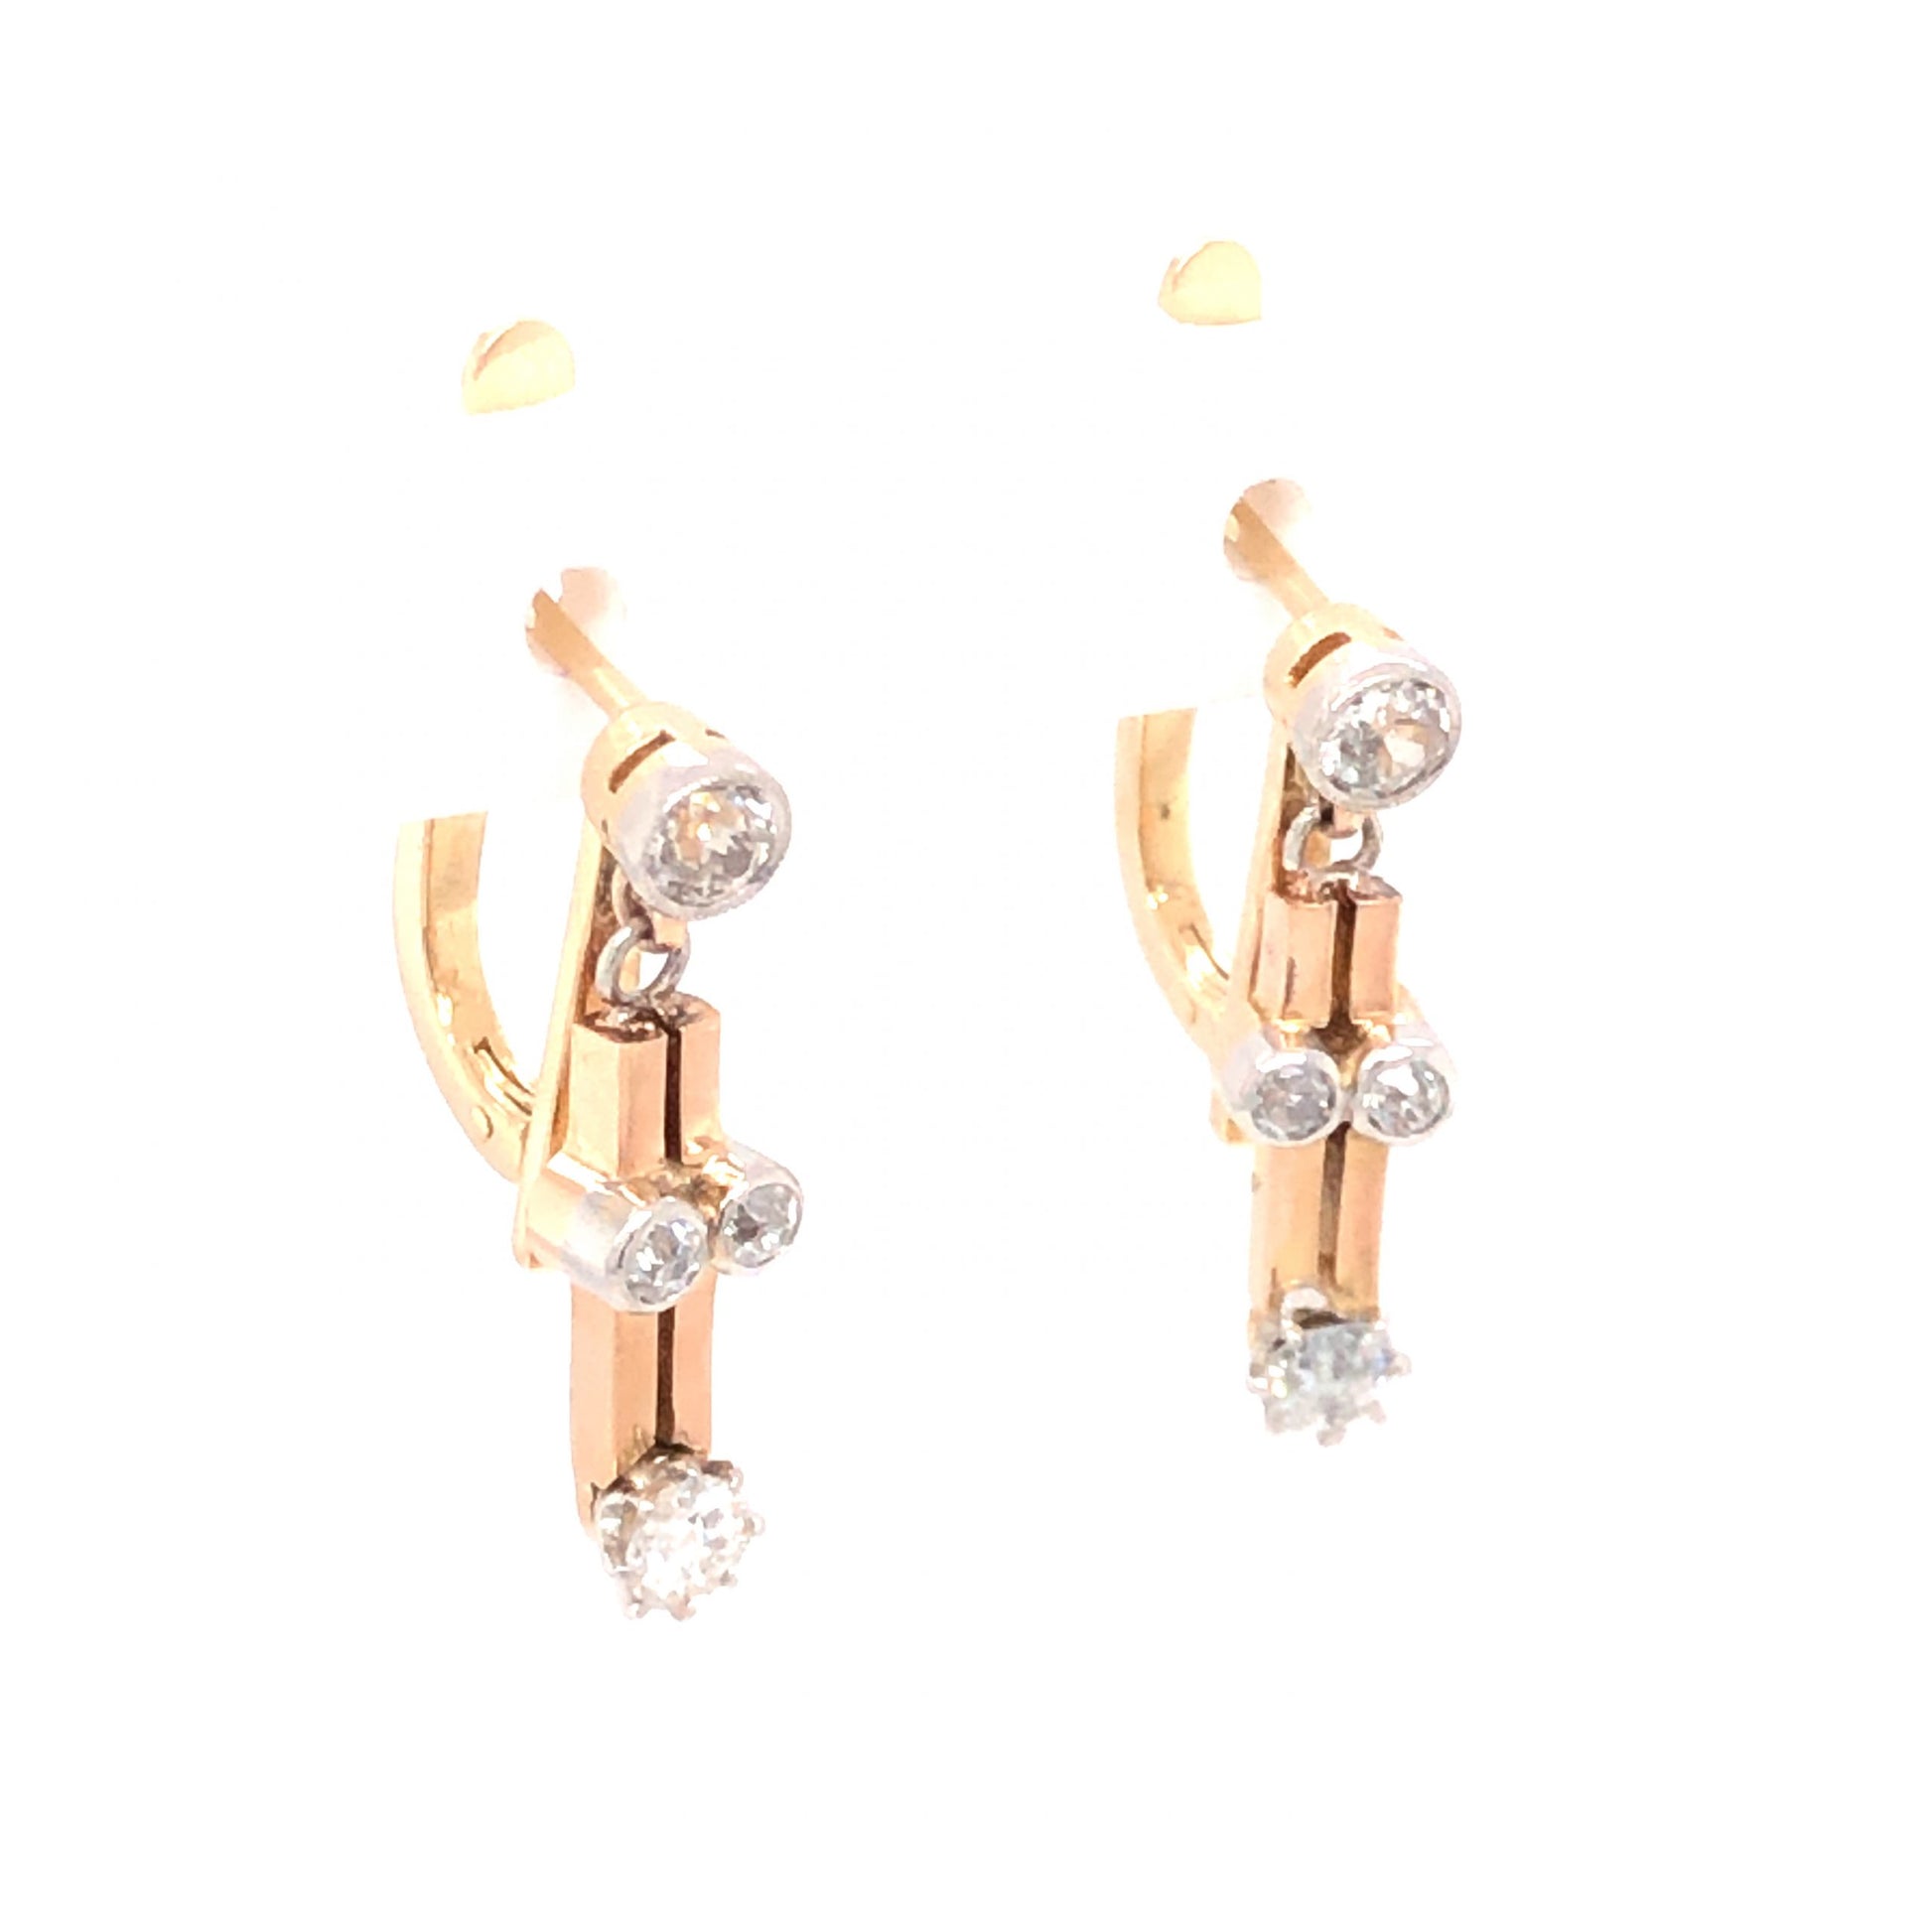 .60 Art Deco Diamond Earrings in 18k Yellow Gold and Platinum